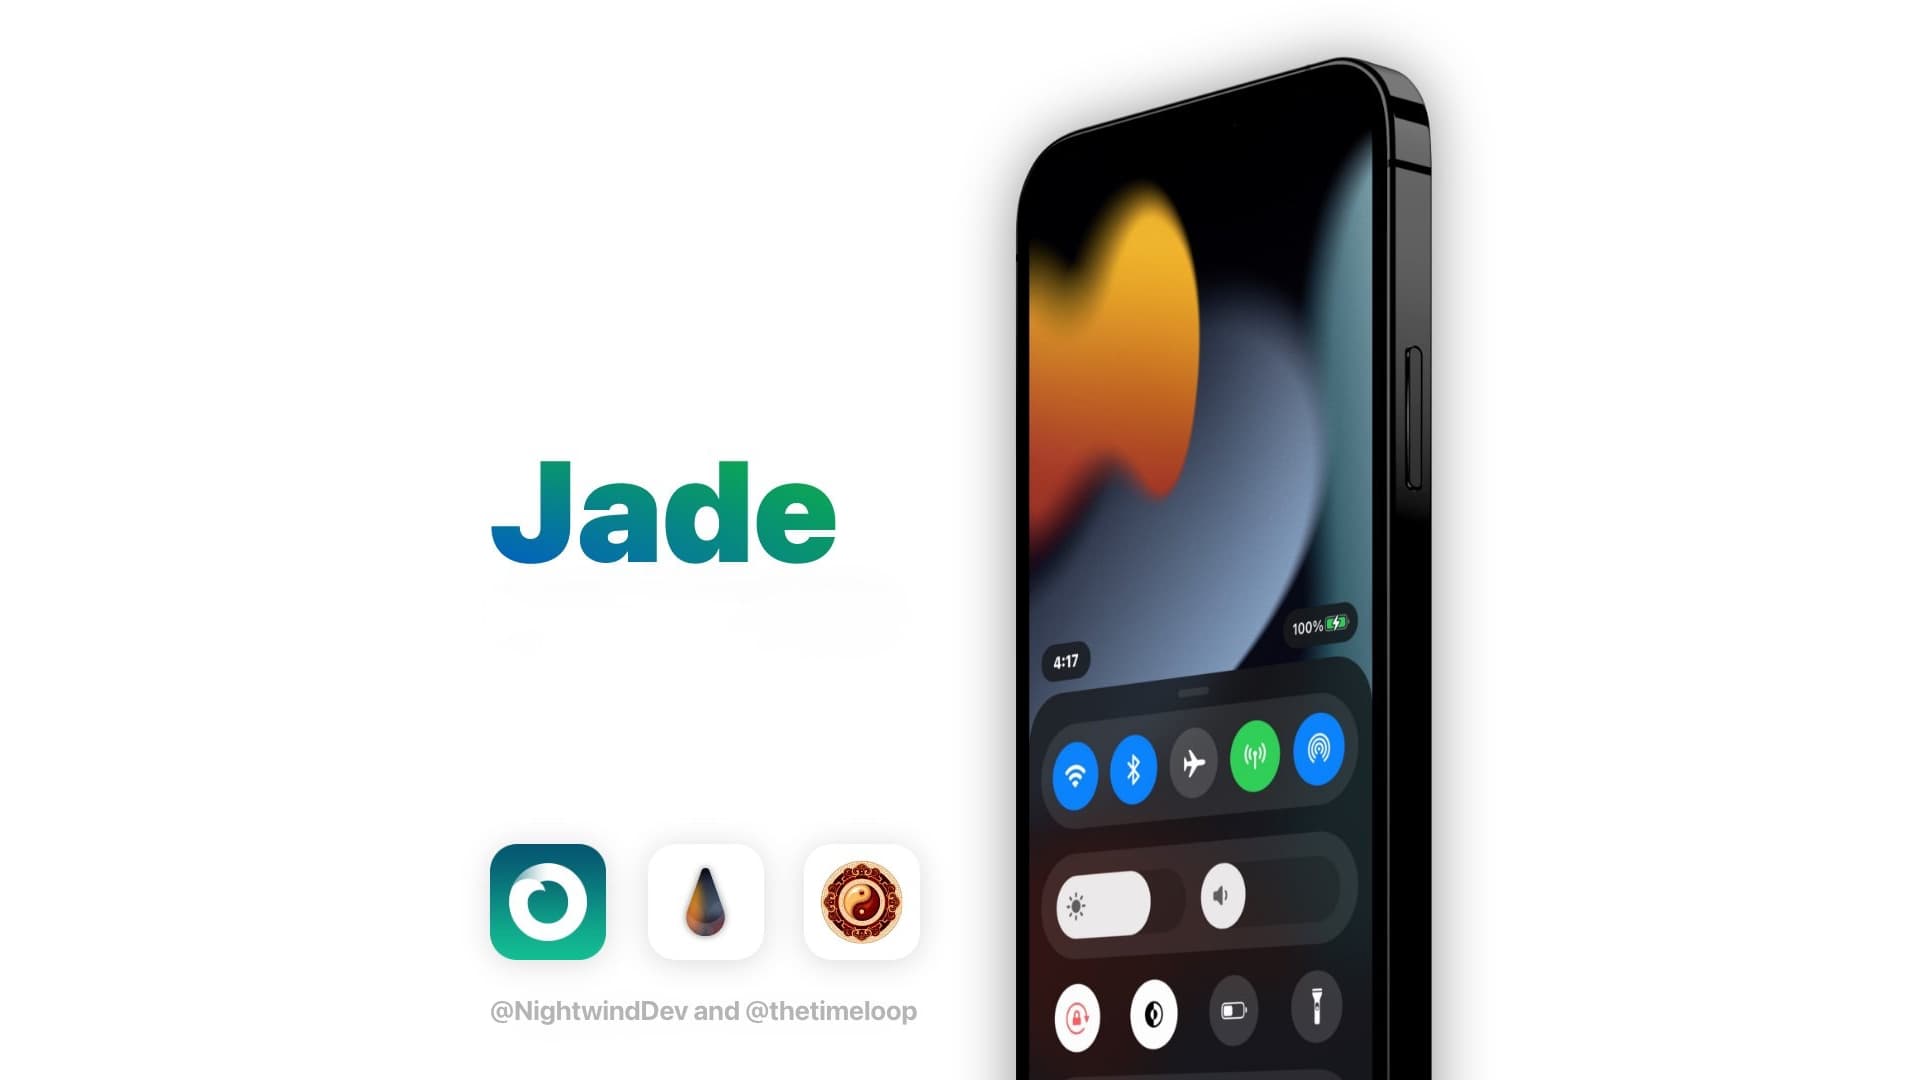 Jade is an entirely re-imagined Control Center experience for jailbroken devices